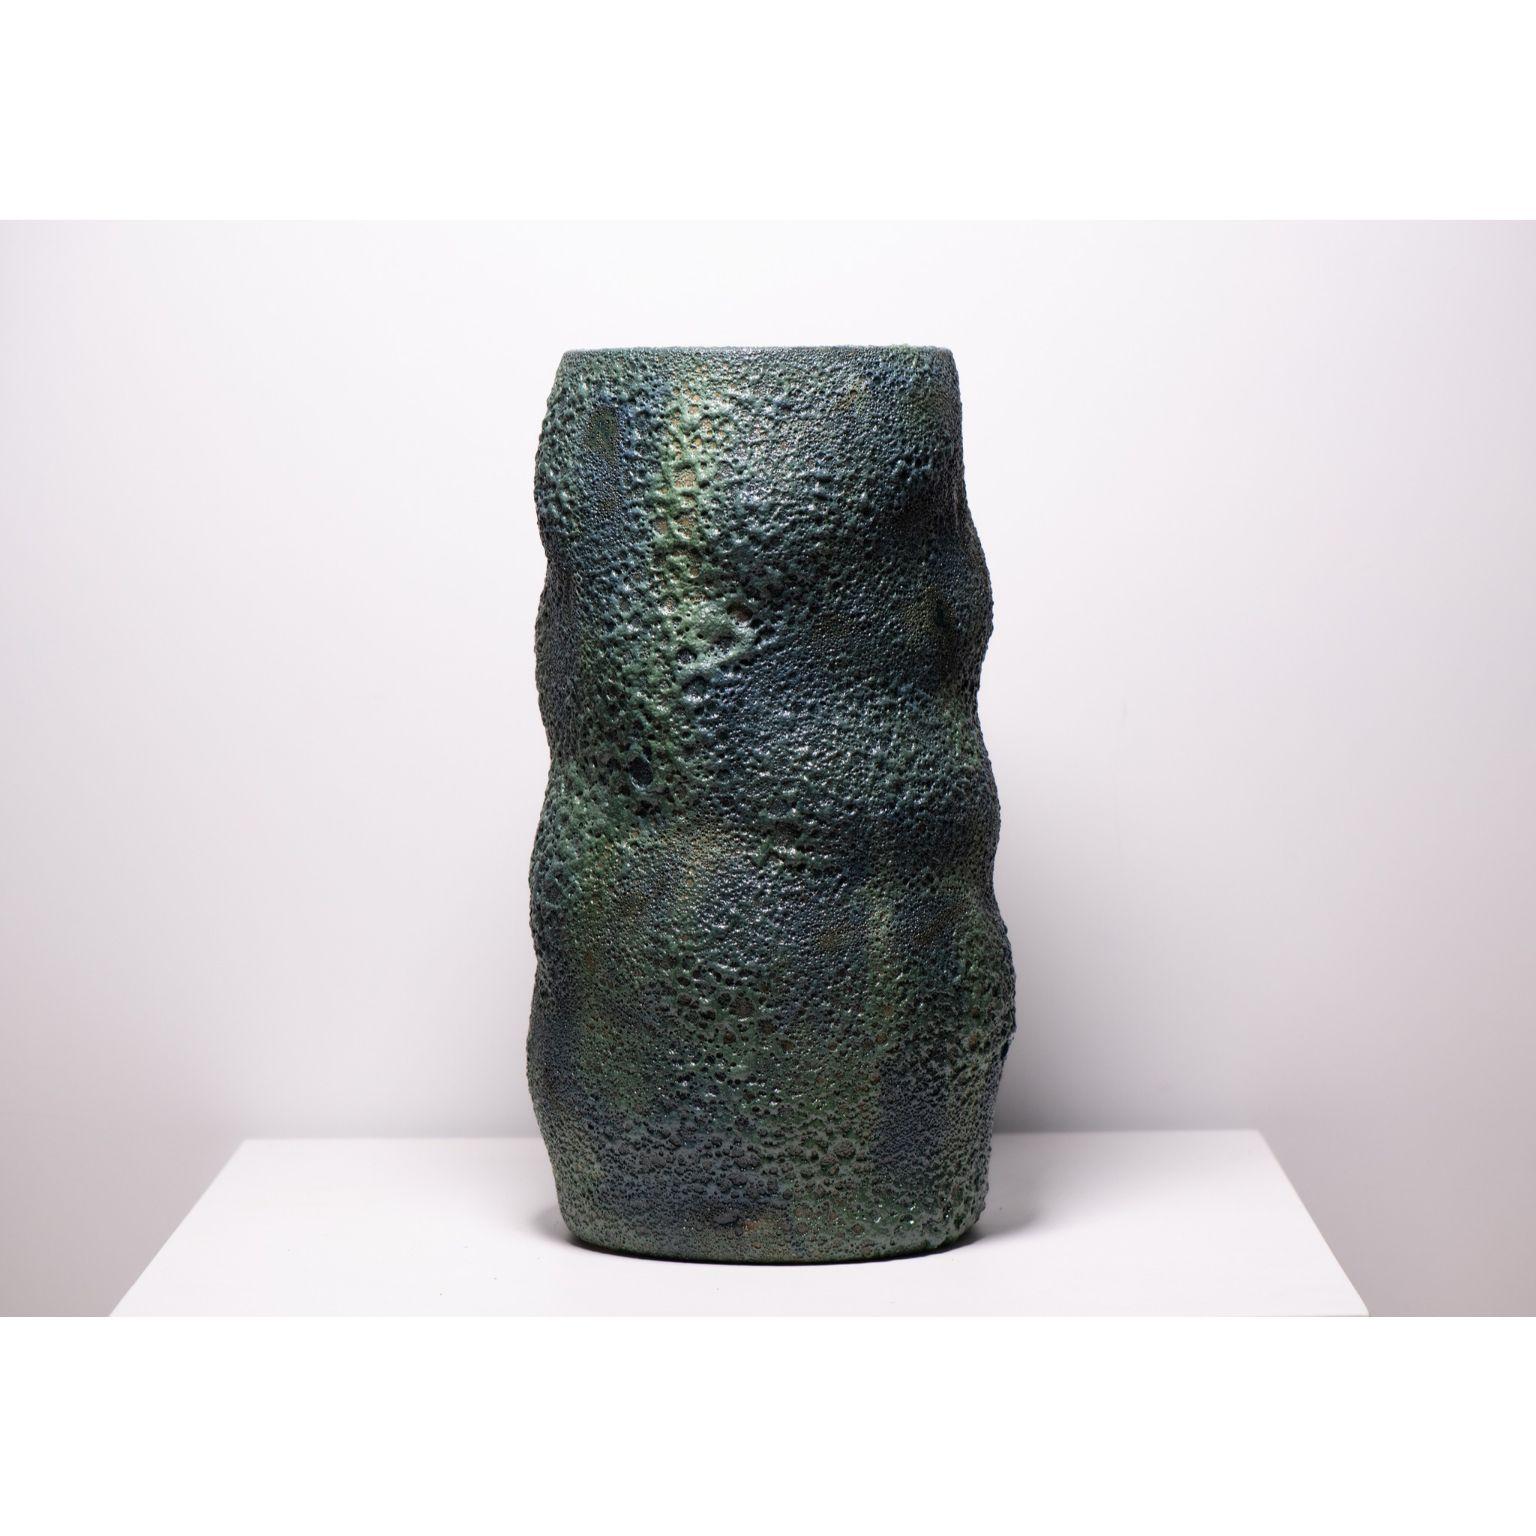 Pigaia Vase XL by Angeliki Stamatakou
One of a kind, 2022
Dimensions: H39 x W22 cm.
Materials: Stoneware, handmade glaze.
Colurs available: ice, blue, forest green, teal, combinations, rust effect. Please contact us.

Angeliki Stamatakou is a